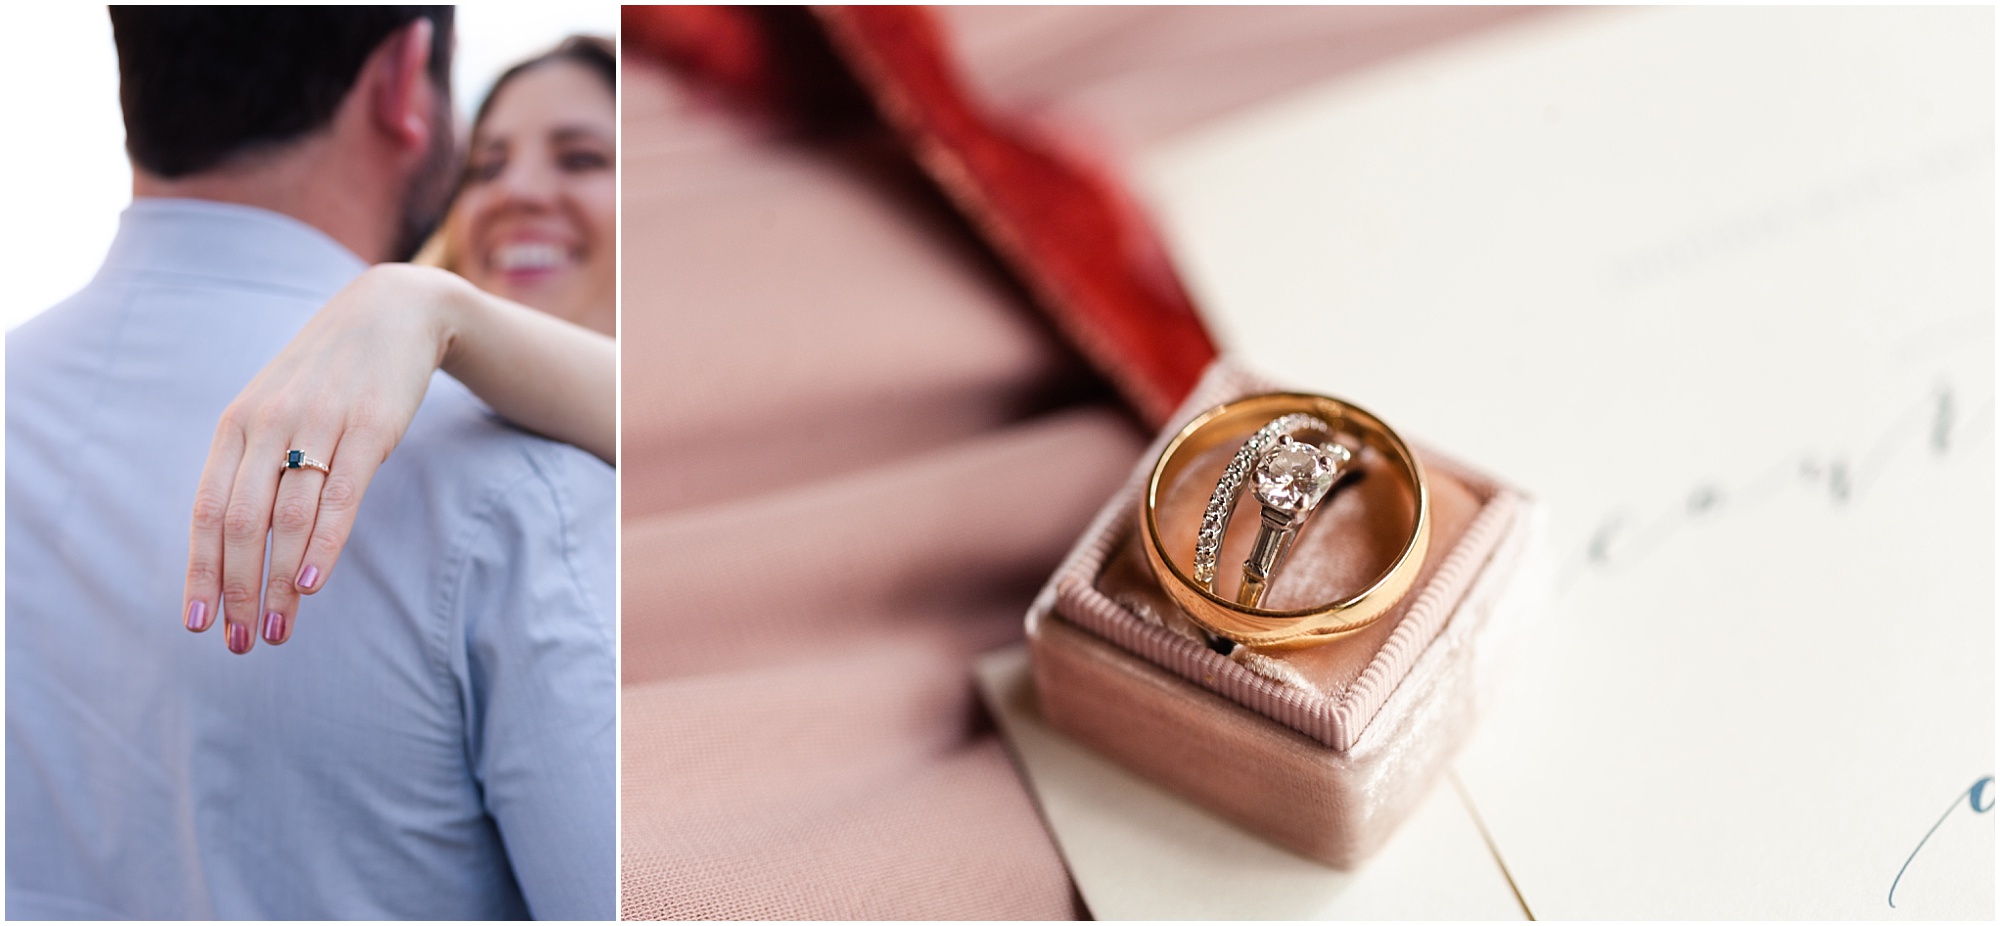 5-Killer-Tips-on-Finding-a-Great-Engagement-Ring